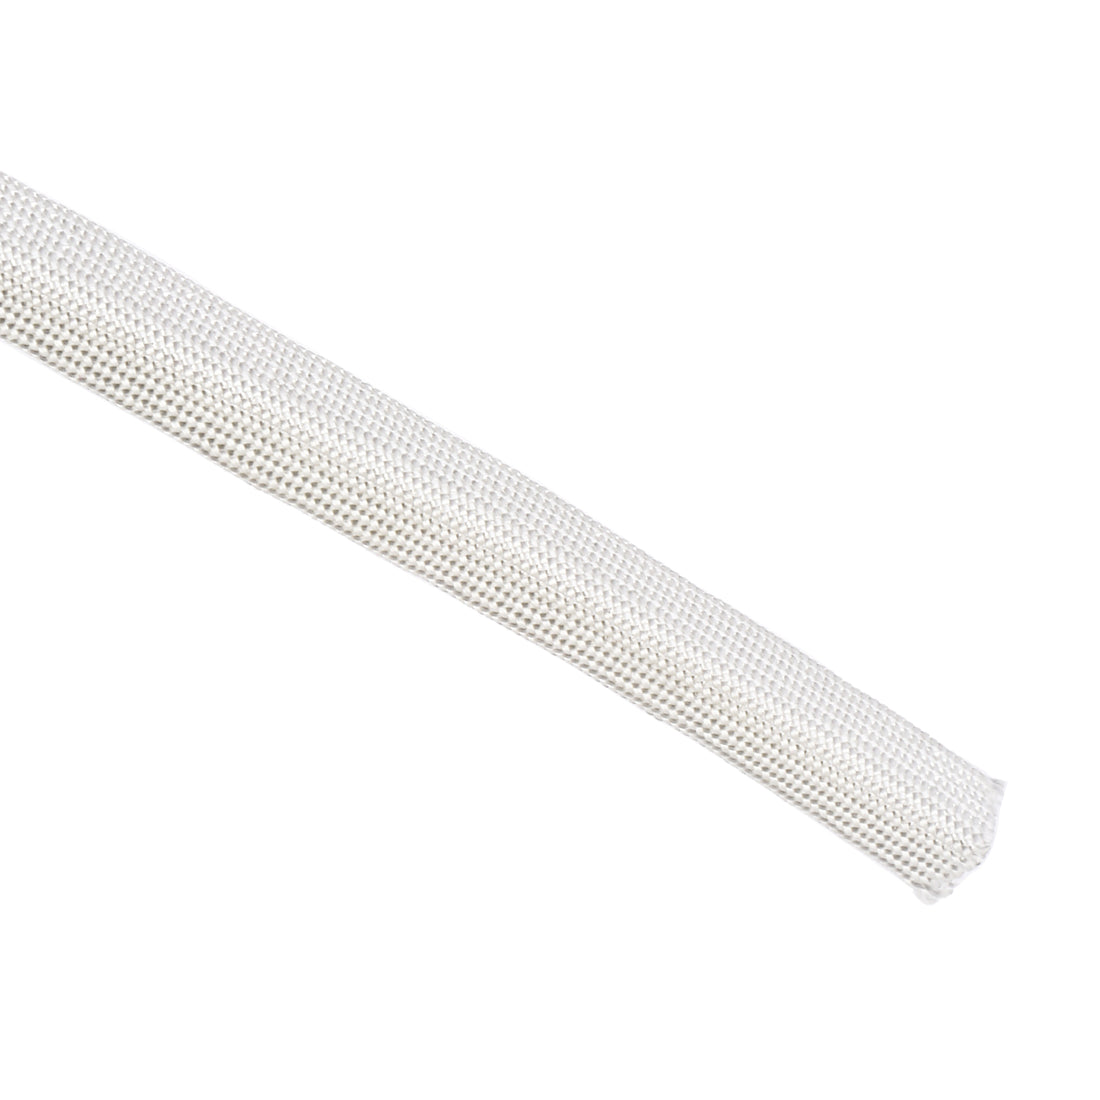 uxcell Uxcell Insulation Cable Protector, 9.8Ft-10mm High TEMP Fiberglass Sleeve White